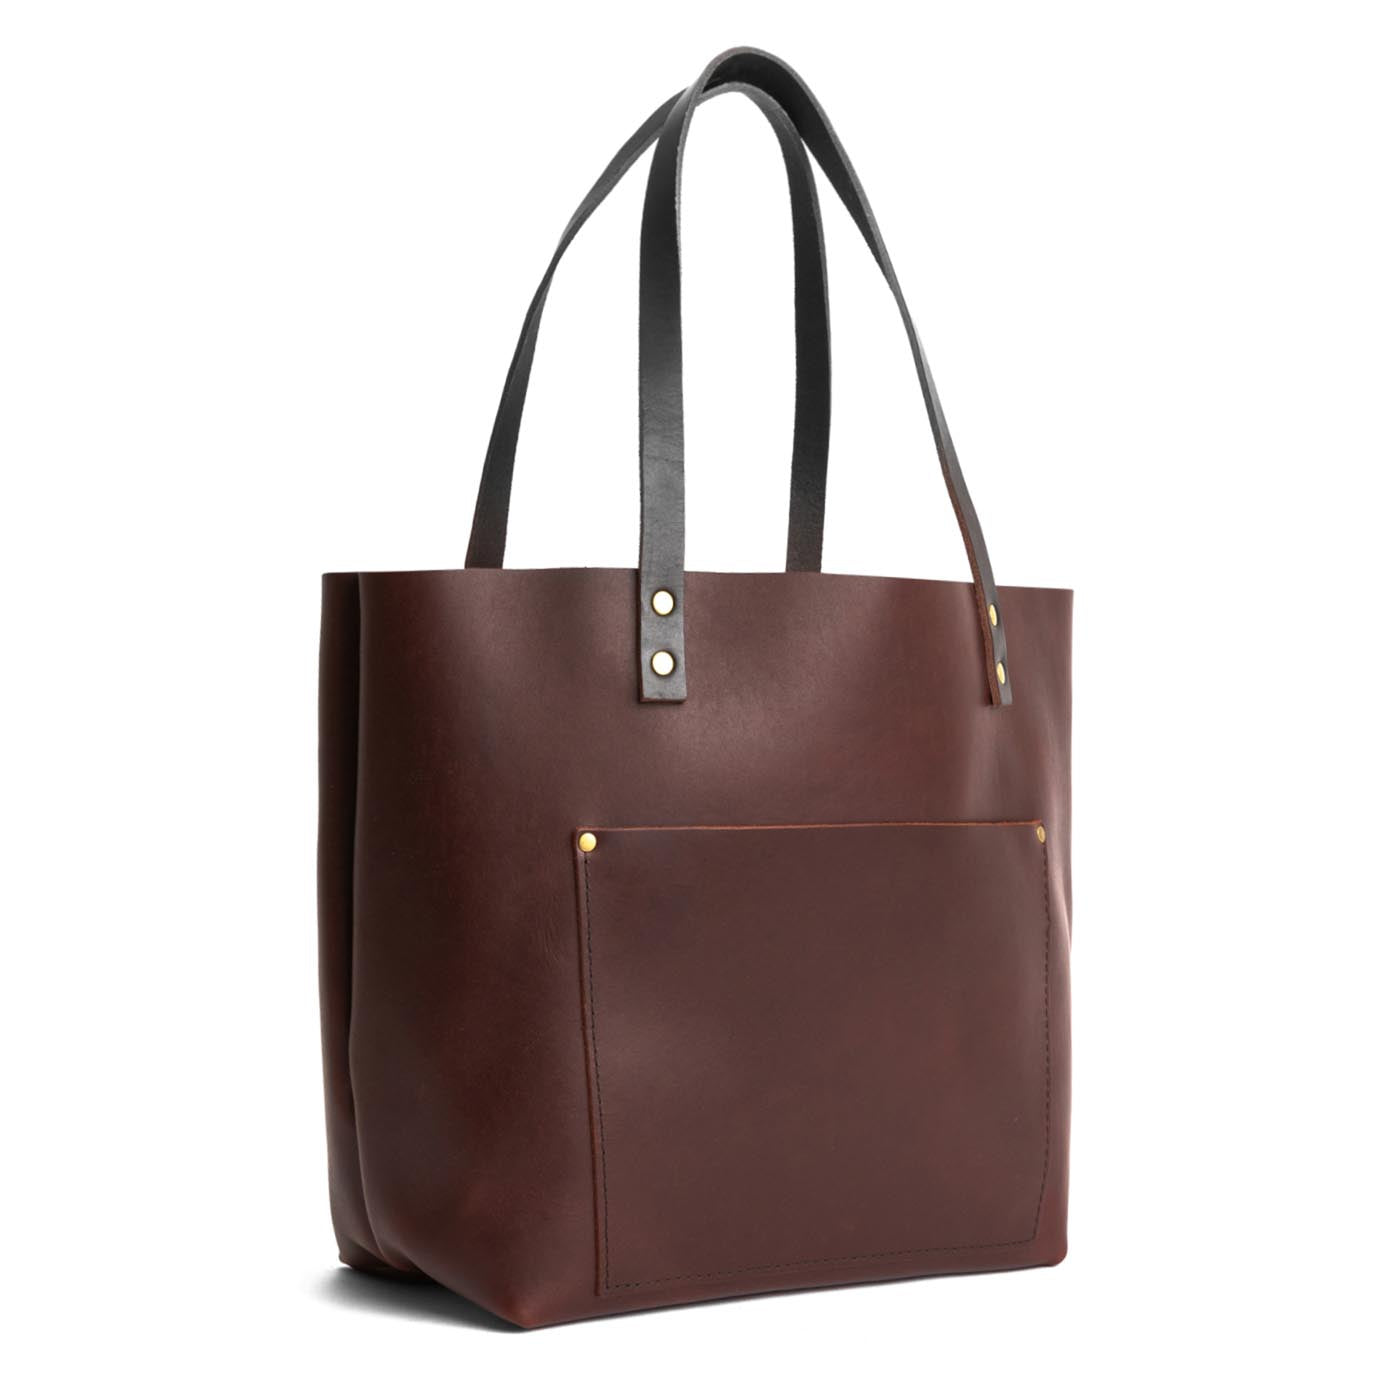 Cognac*Classic | Large leather tote bag with sturdy bridle handles and front pocket